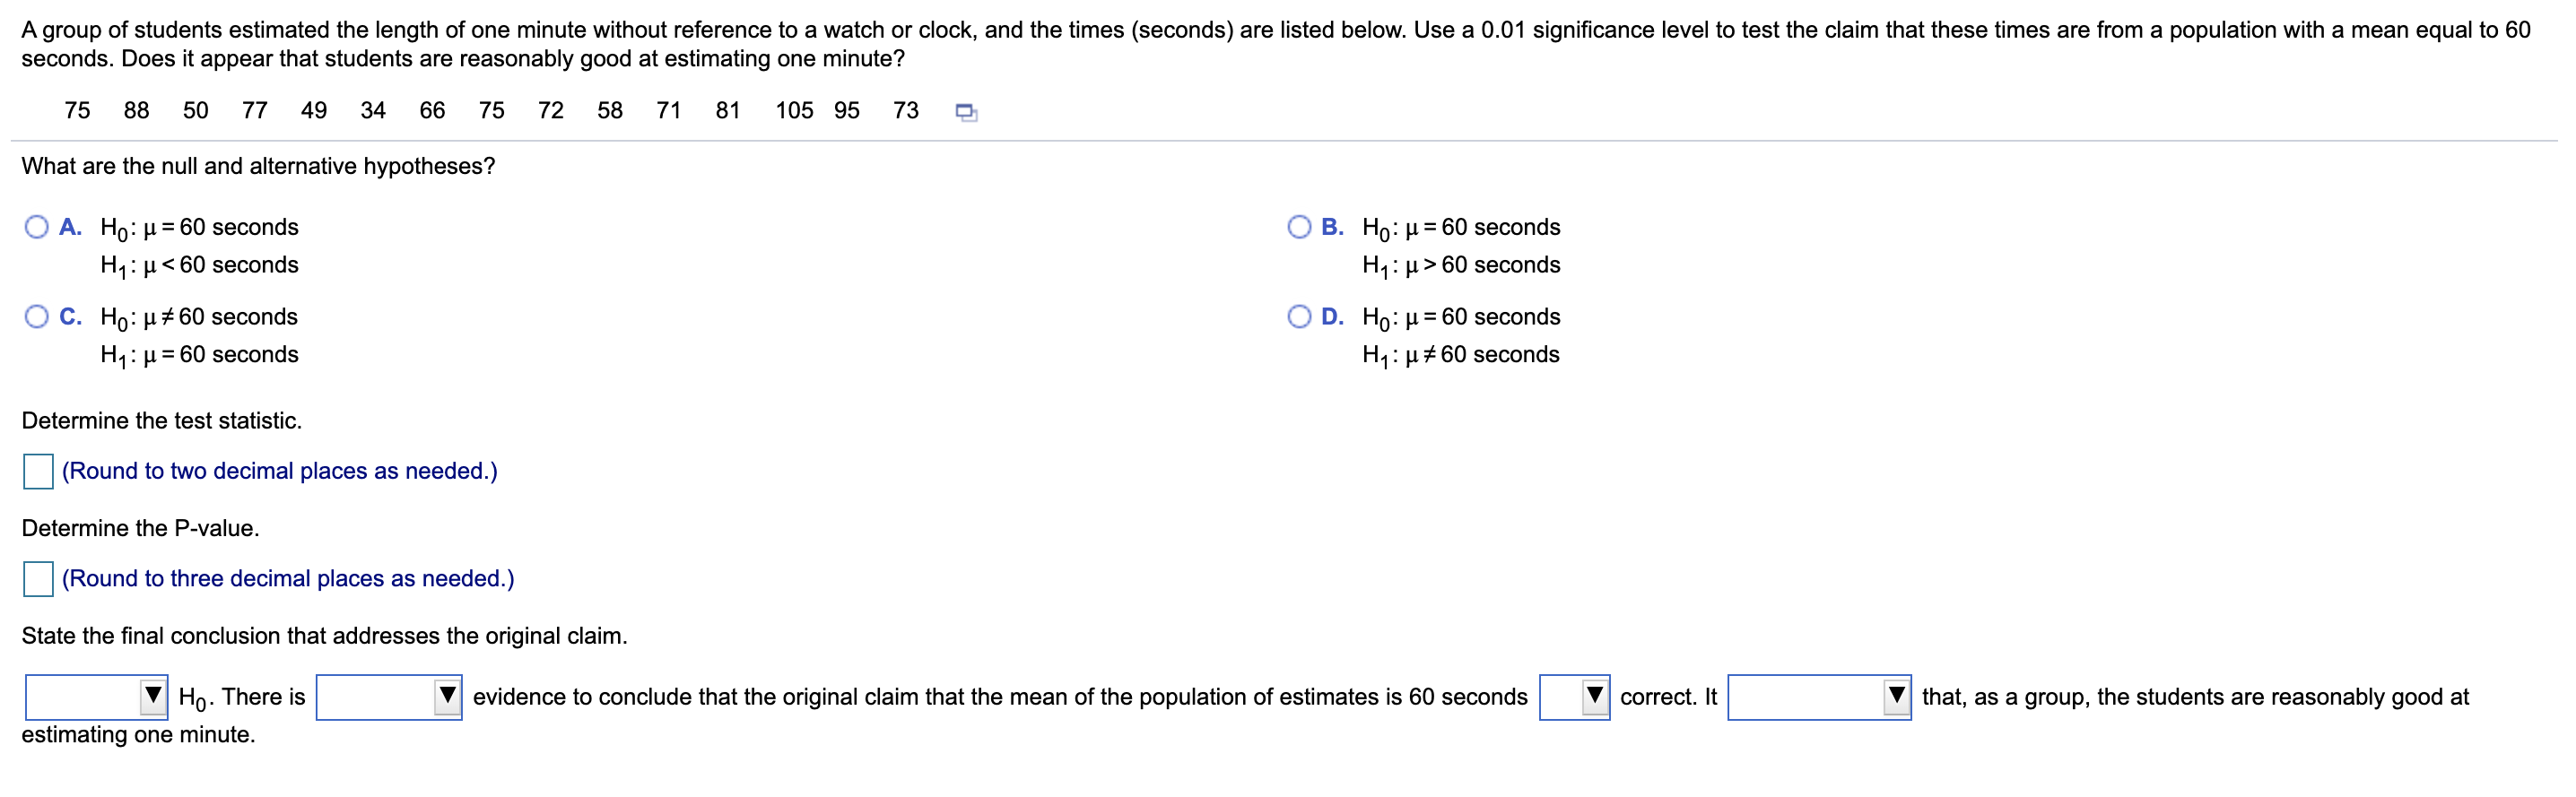 A group of students estimated the length of one minute without reference to a watch or clock, and the times (seconds) are listed below. Use a 0.01 significance level to test the claim that these times are from a population with a mean equal to 60
seconds. Does it appear that students are reasonably good at estimating one minute?
75
88
50
77
49
34
66
75
72
58
71
81
105 95
73
What are the null and alternative hypotheses?
O A. Ho: µ= 60 seconds
B. Ho: µ = 60 seconds
%3D
%3D
H1: µ< 60 seconds
H1: µ > 60 seconds
C. Ho: µ + 60 seconds
D. Ho: µ = 60 seconds
H1: µ= 60 seconds
H1: µ# 60 seconds
Determine the test statistic.
(Round to two decimal places as needed.)
Determine the P-value.
(Round to three decimal places as needed.)
State the final conclusion that addresses the original claim.
Ho. There is
estimating one minute.
evidence to conclude that the original claim that the mean of the population of estimates is 60 seconds
correct. It
that, as a group, the students are reasonably good at
